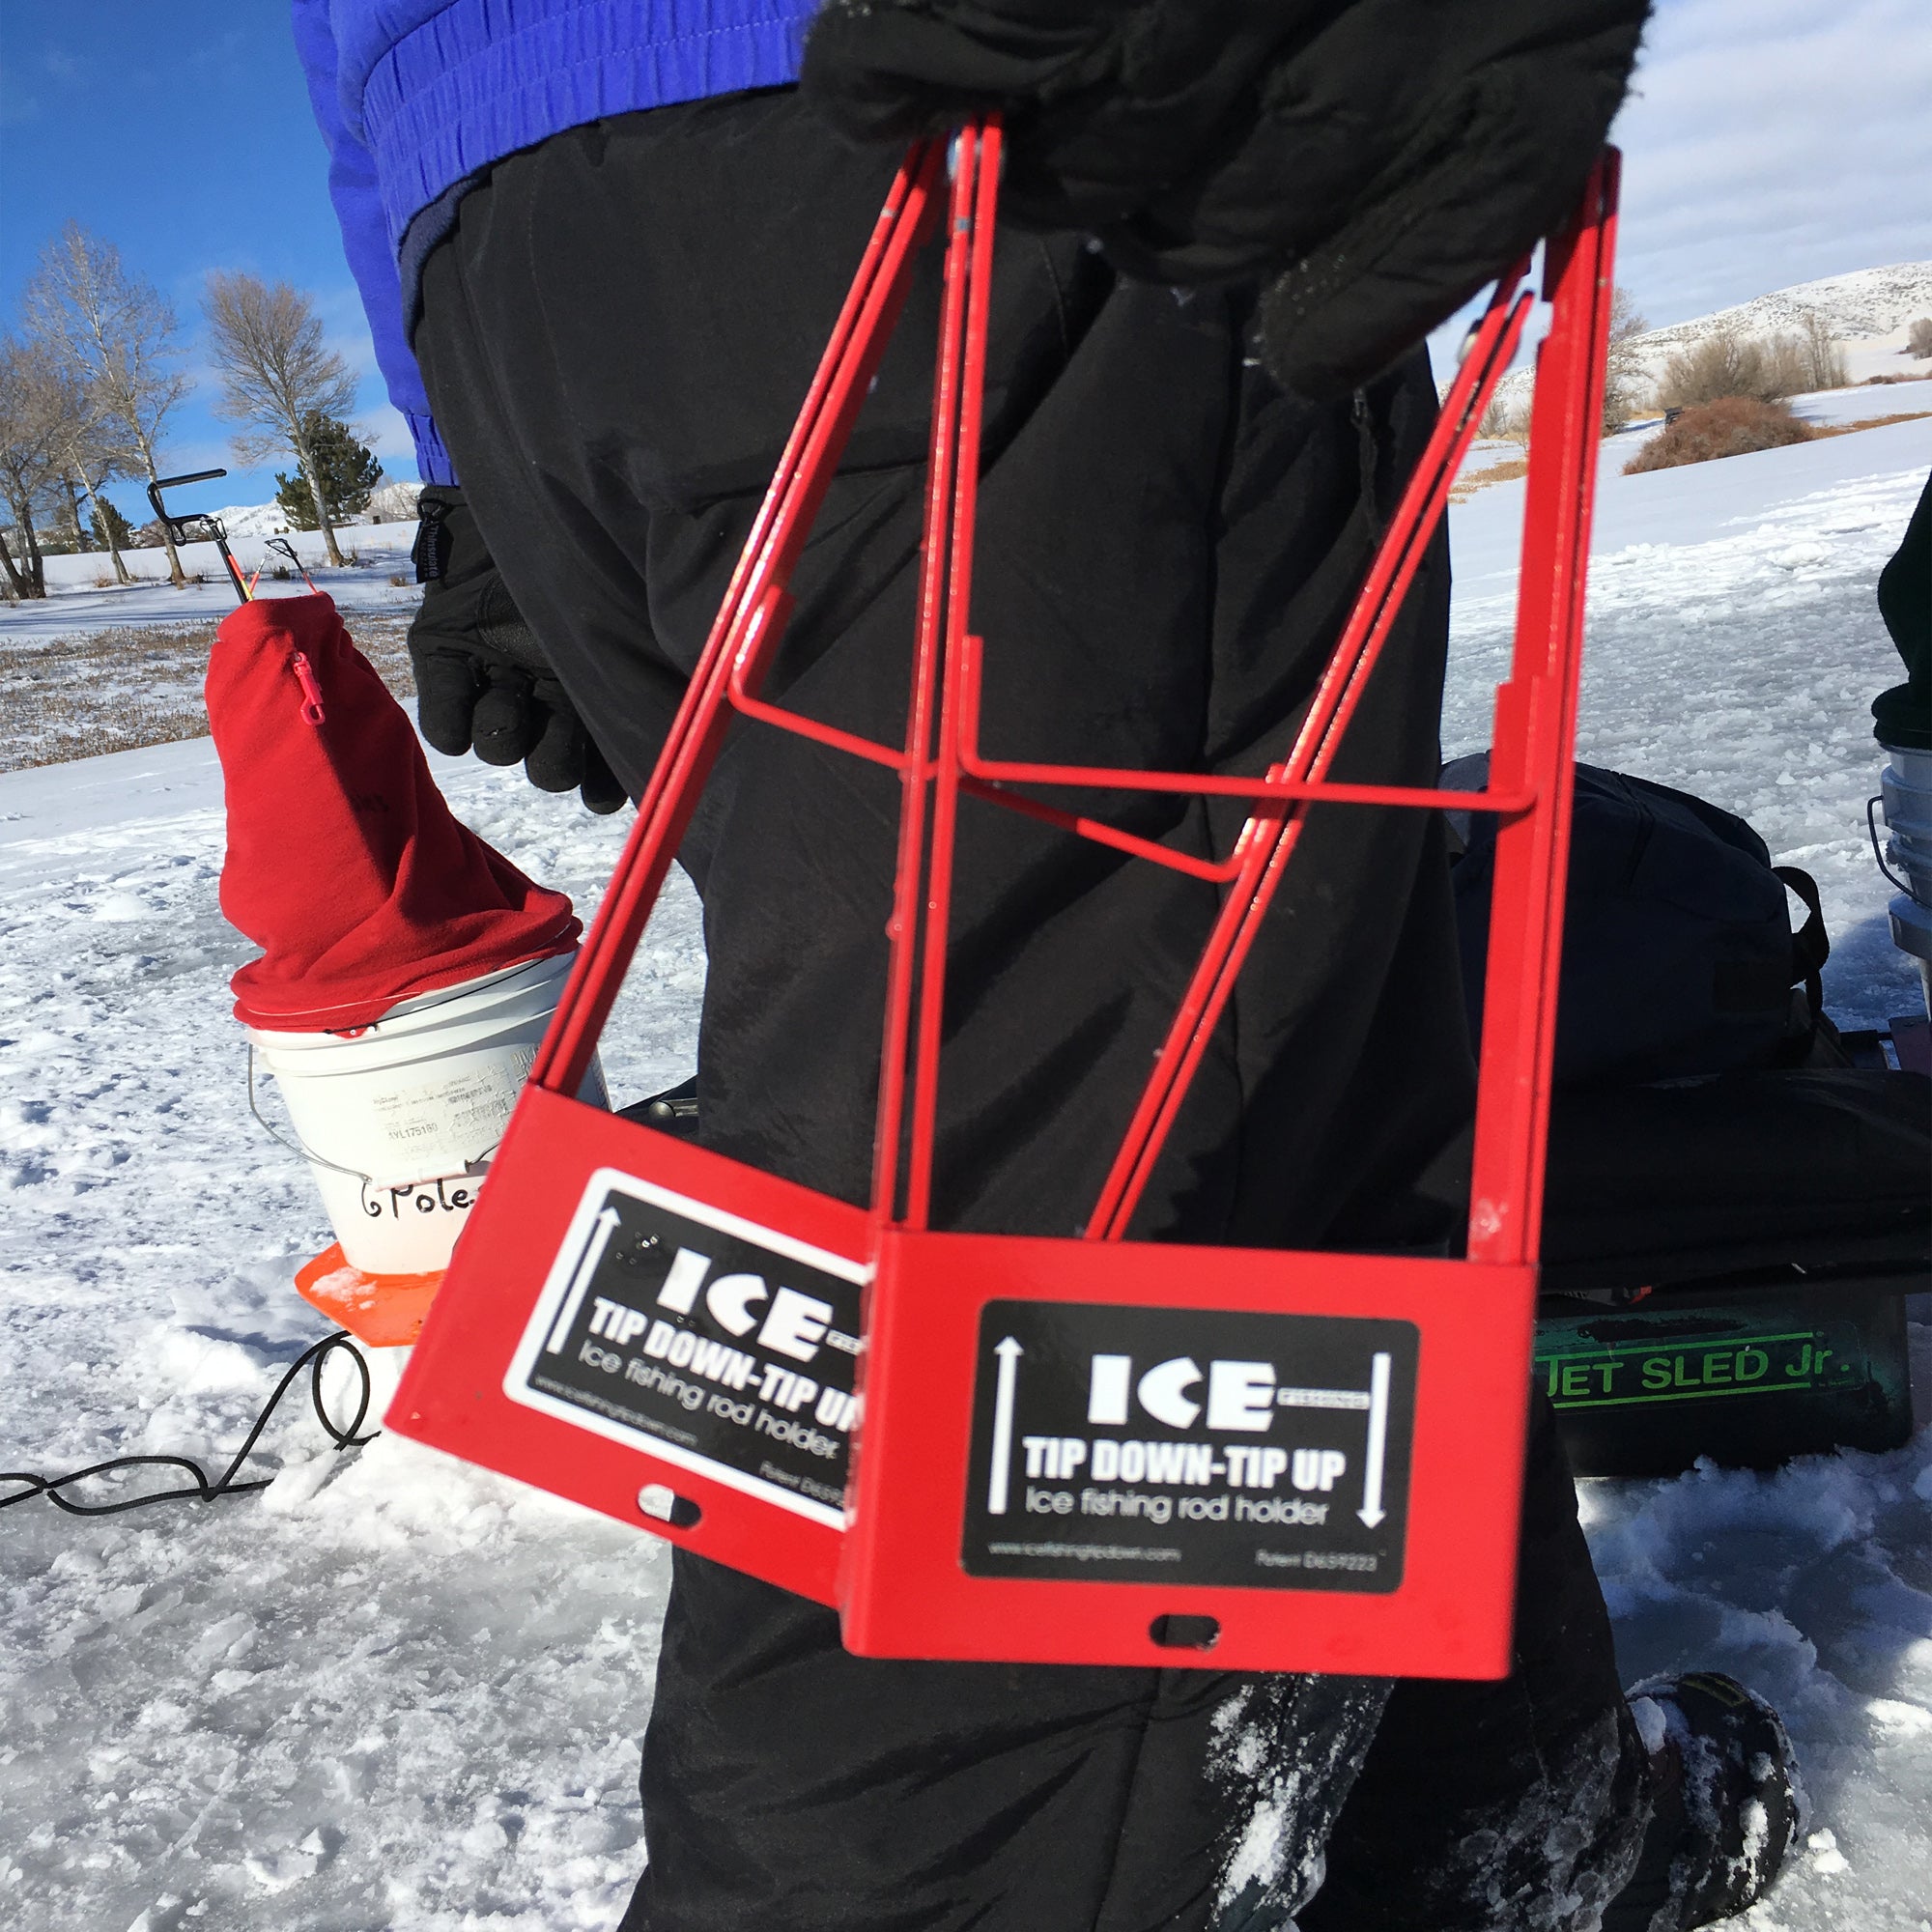 Ice Fishing Tip Down-Tip Up REPLACEMENT CLIPS—Ice Algeria